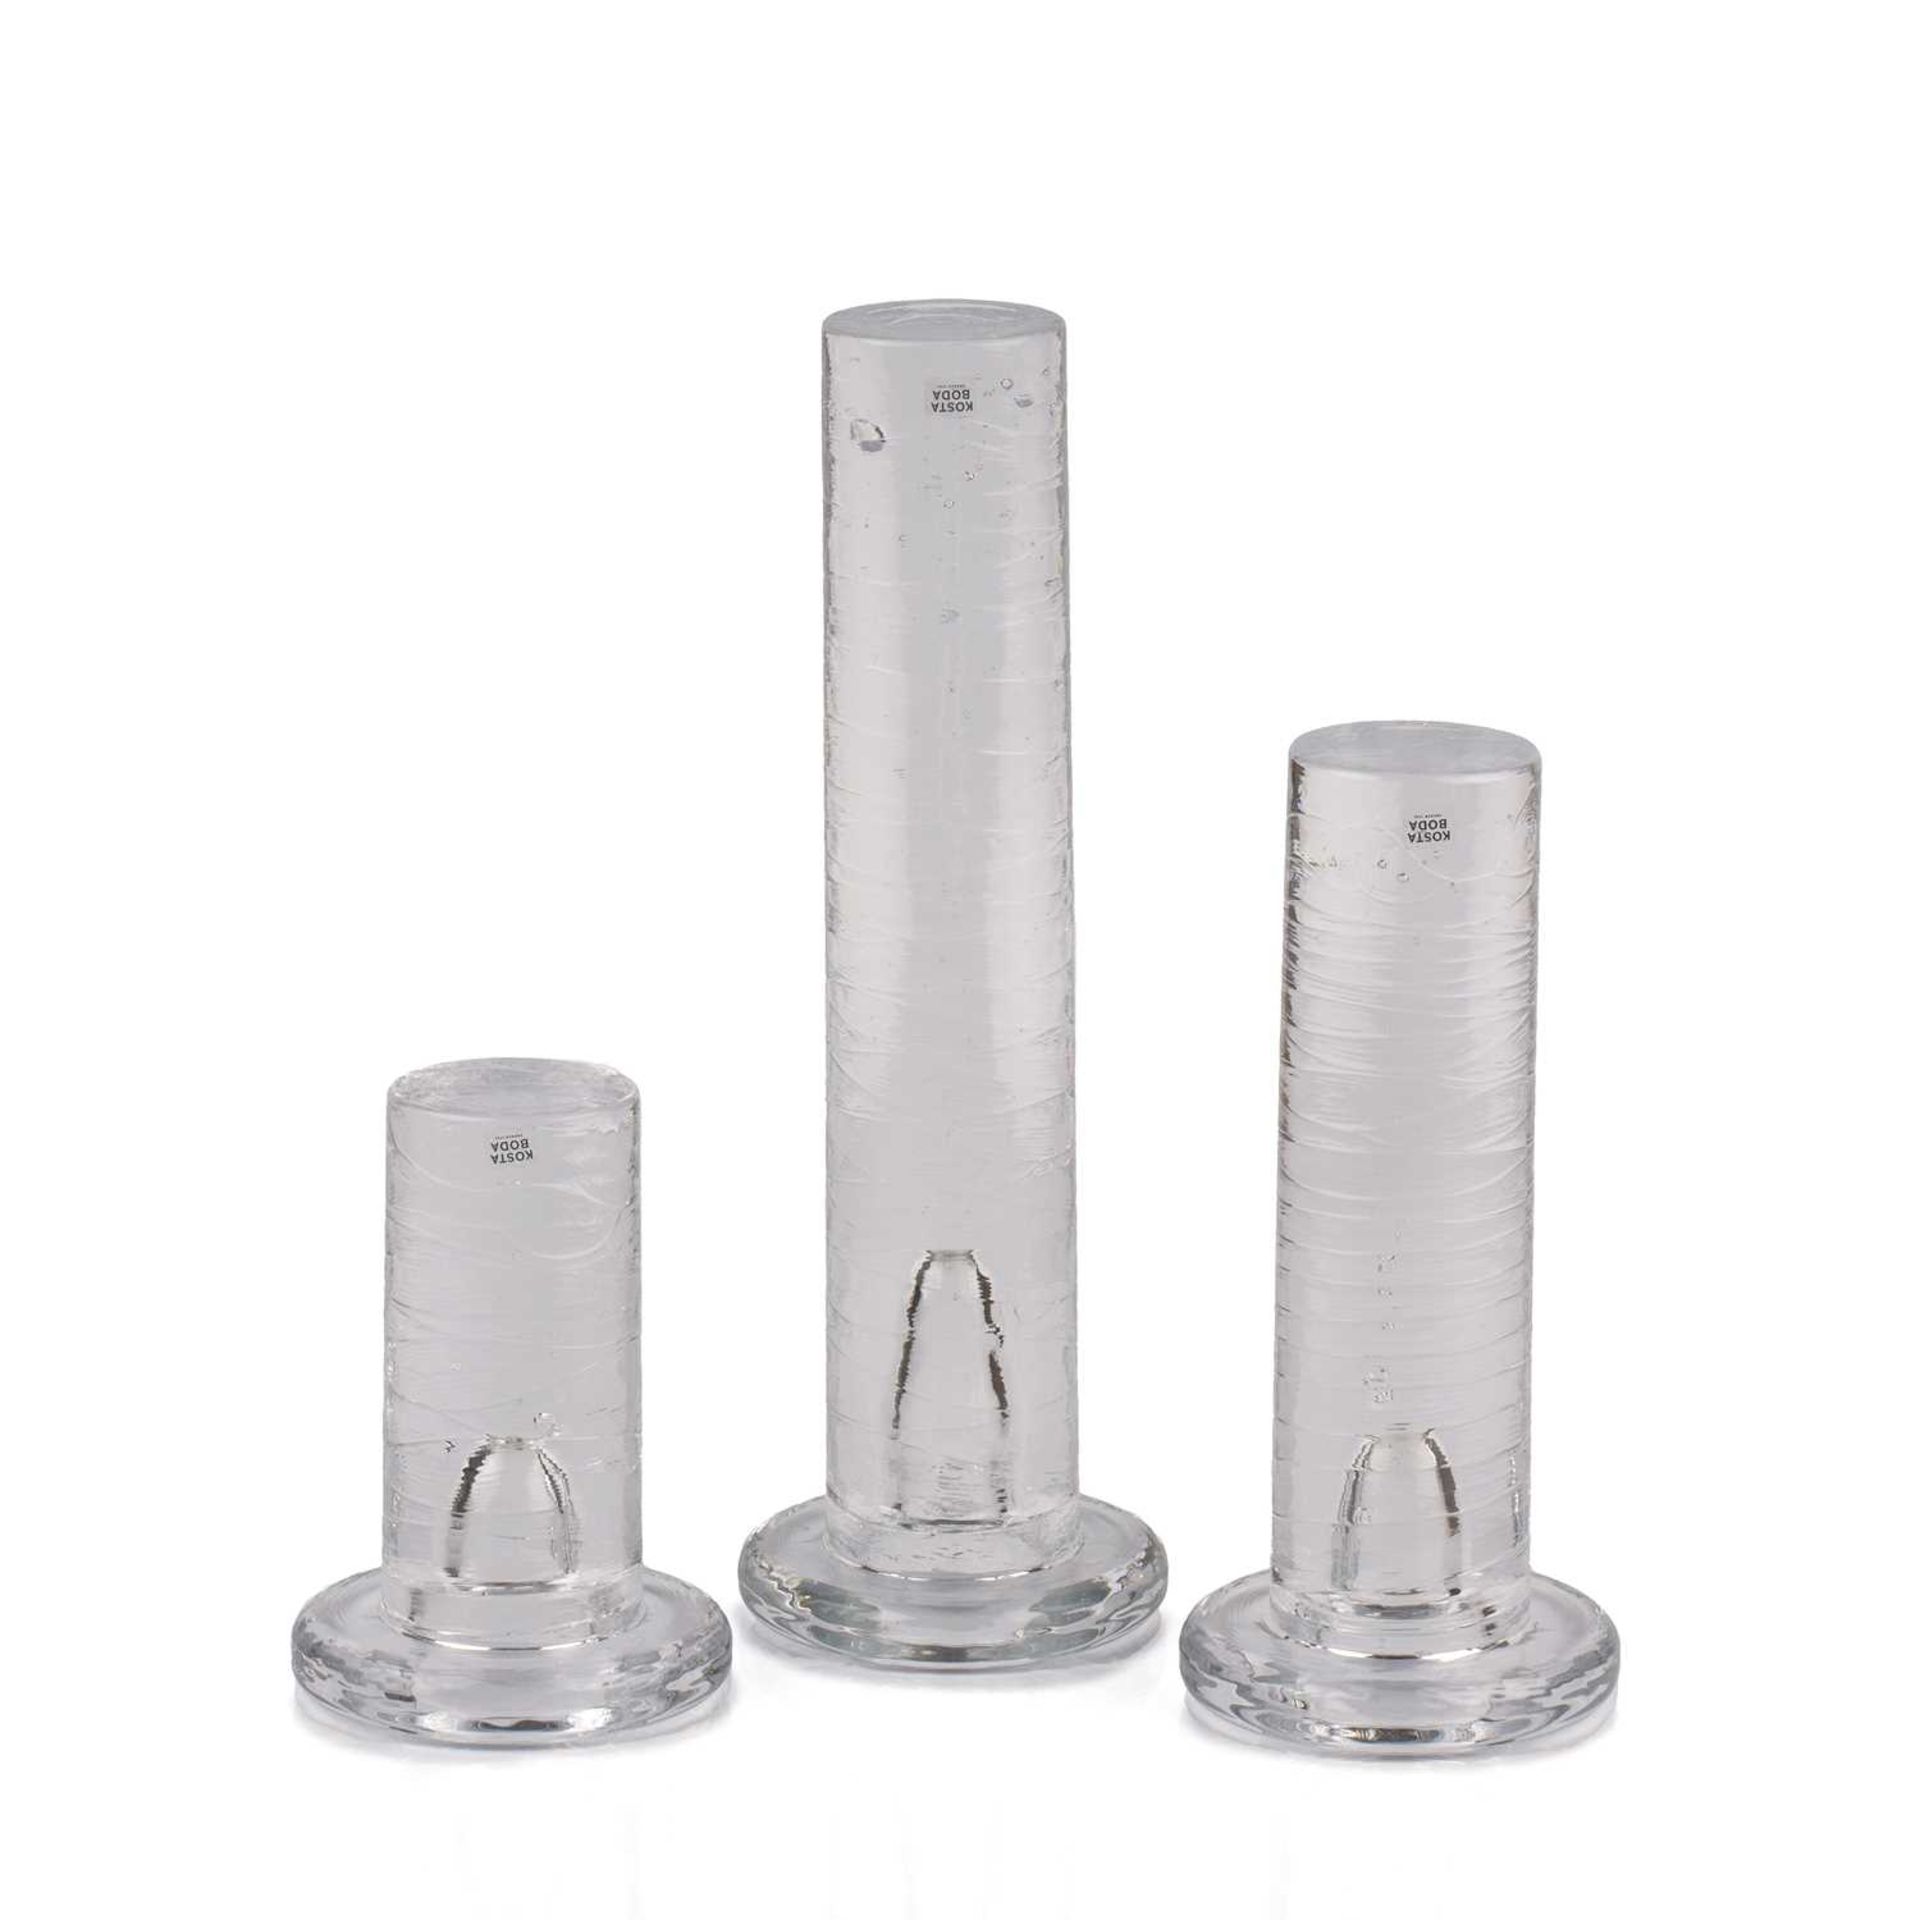 Kosta Boda Three graduated candle holders clear glass the tallest 30cm high.